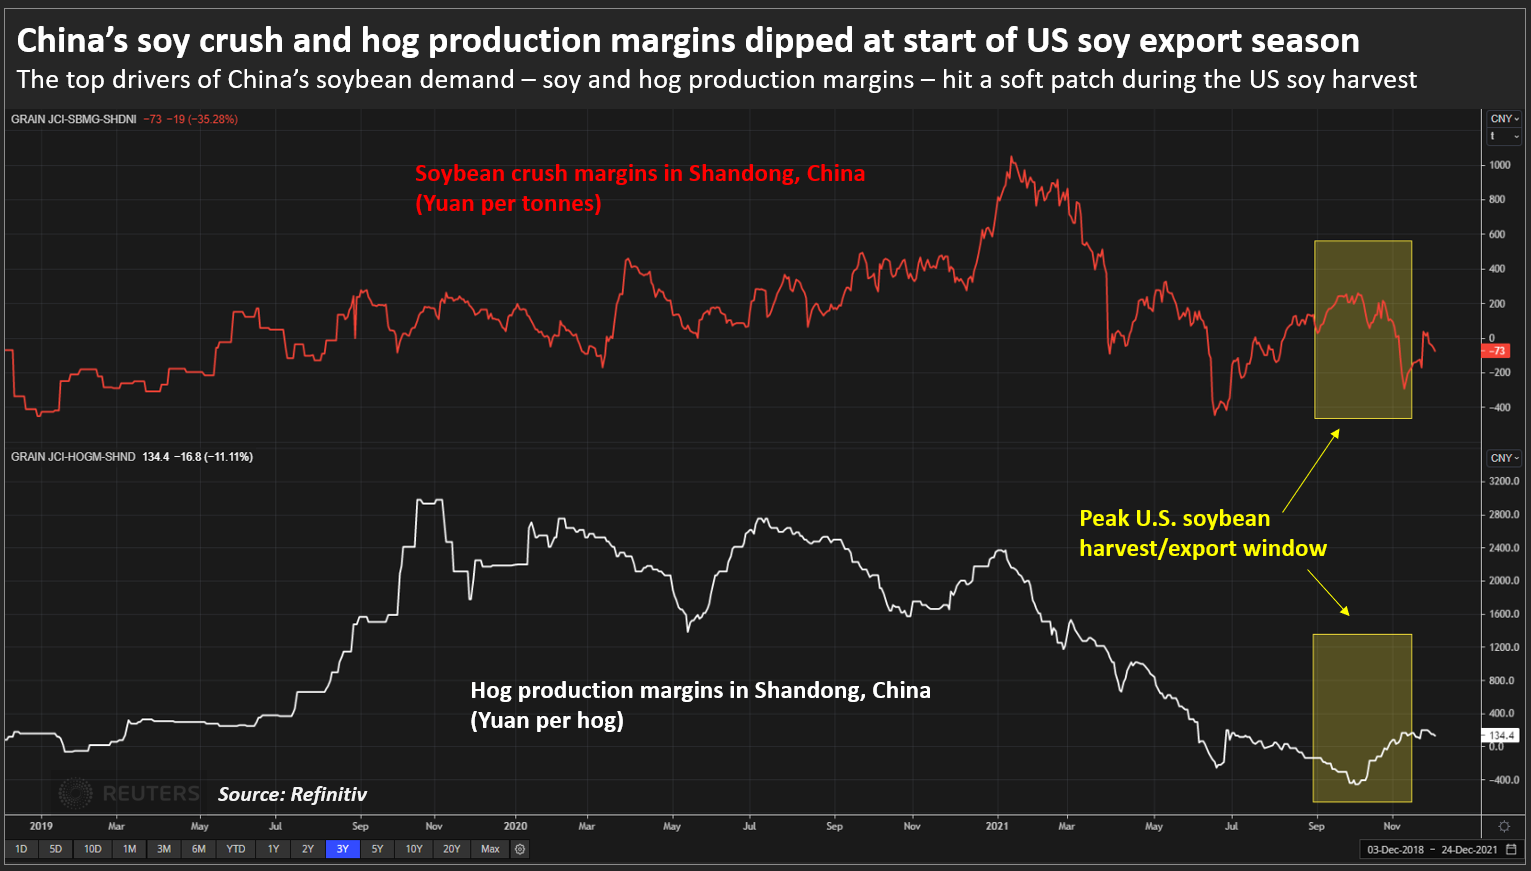 China's soybean and pork production margins fell at the start of the US soybean export season